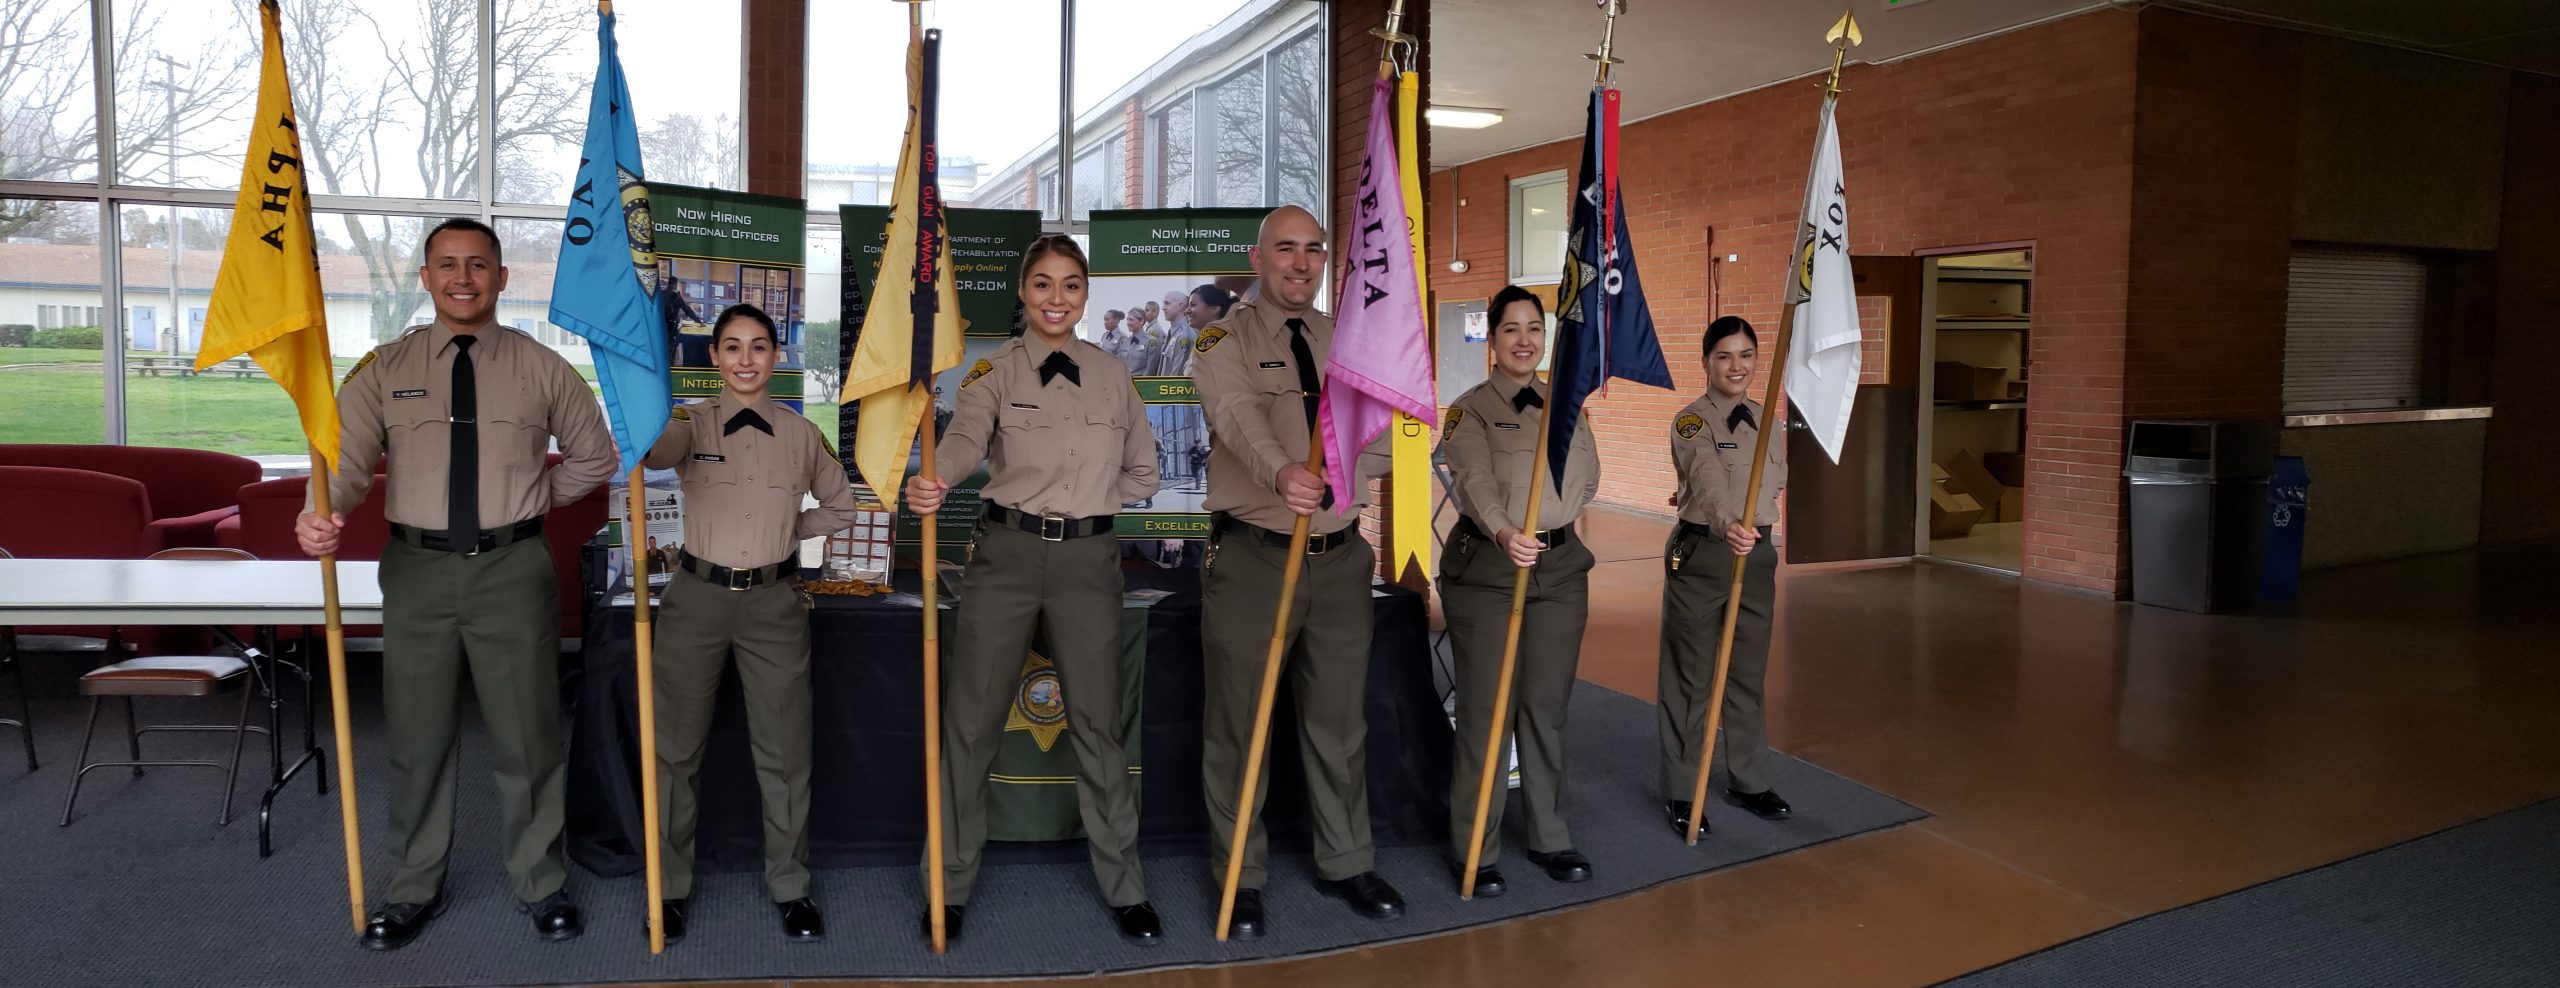 CDCR staff holding flags